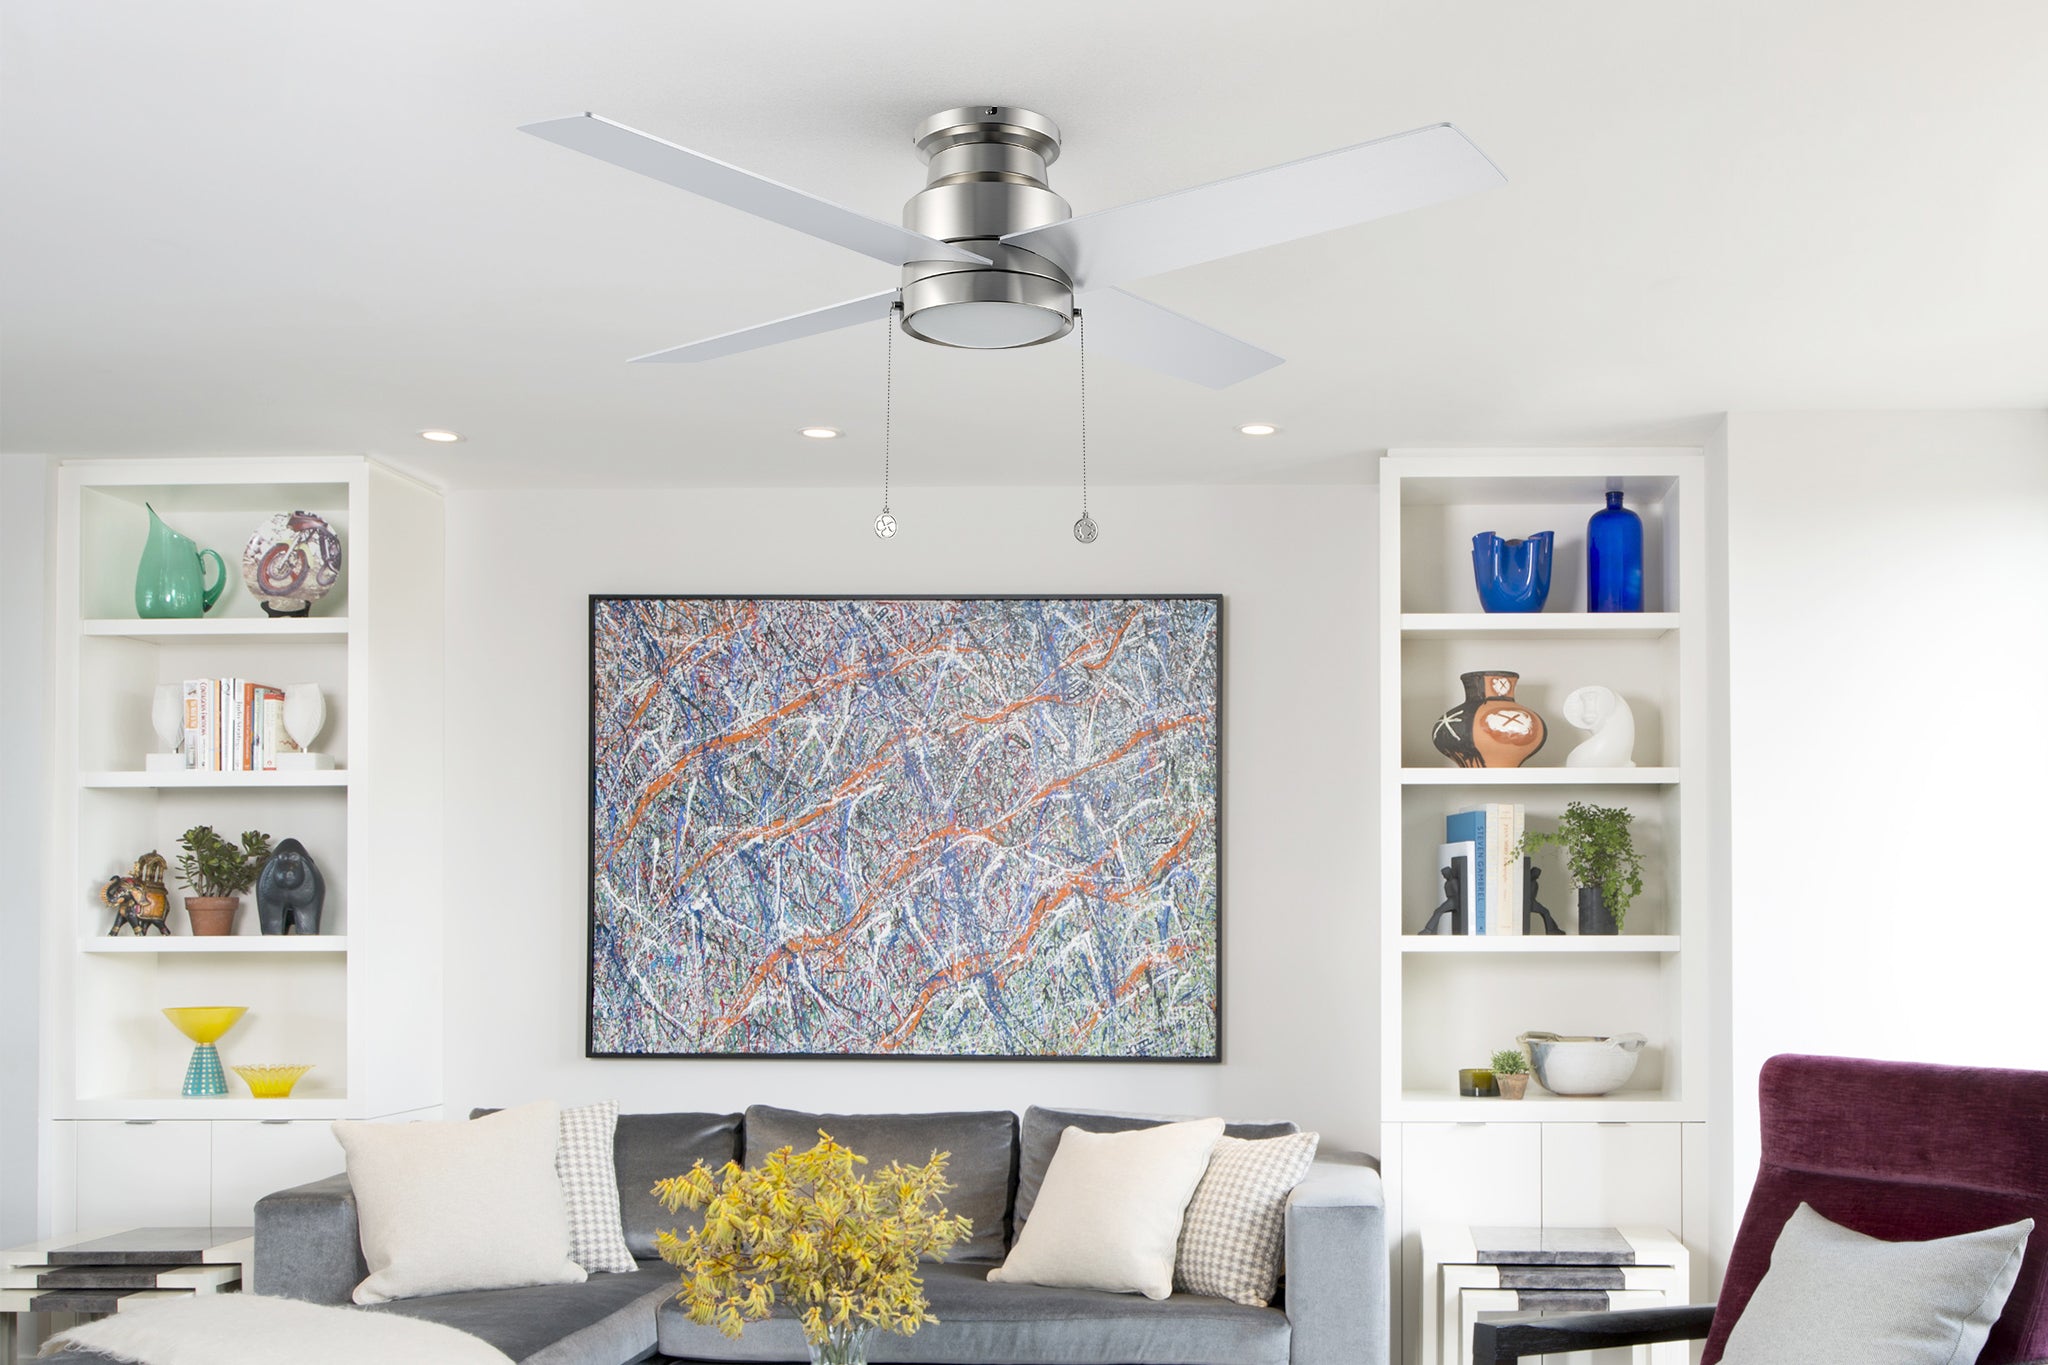 Luft low profile ceiling fan with light and silver color design in modern living room.